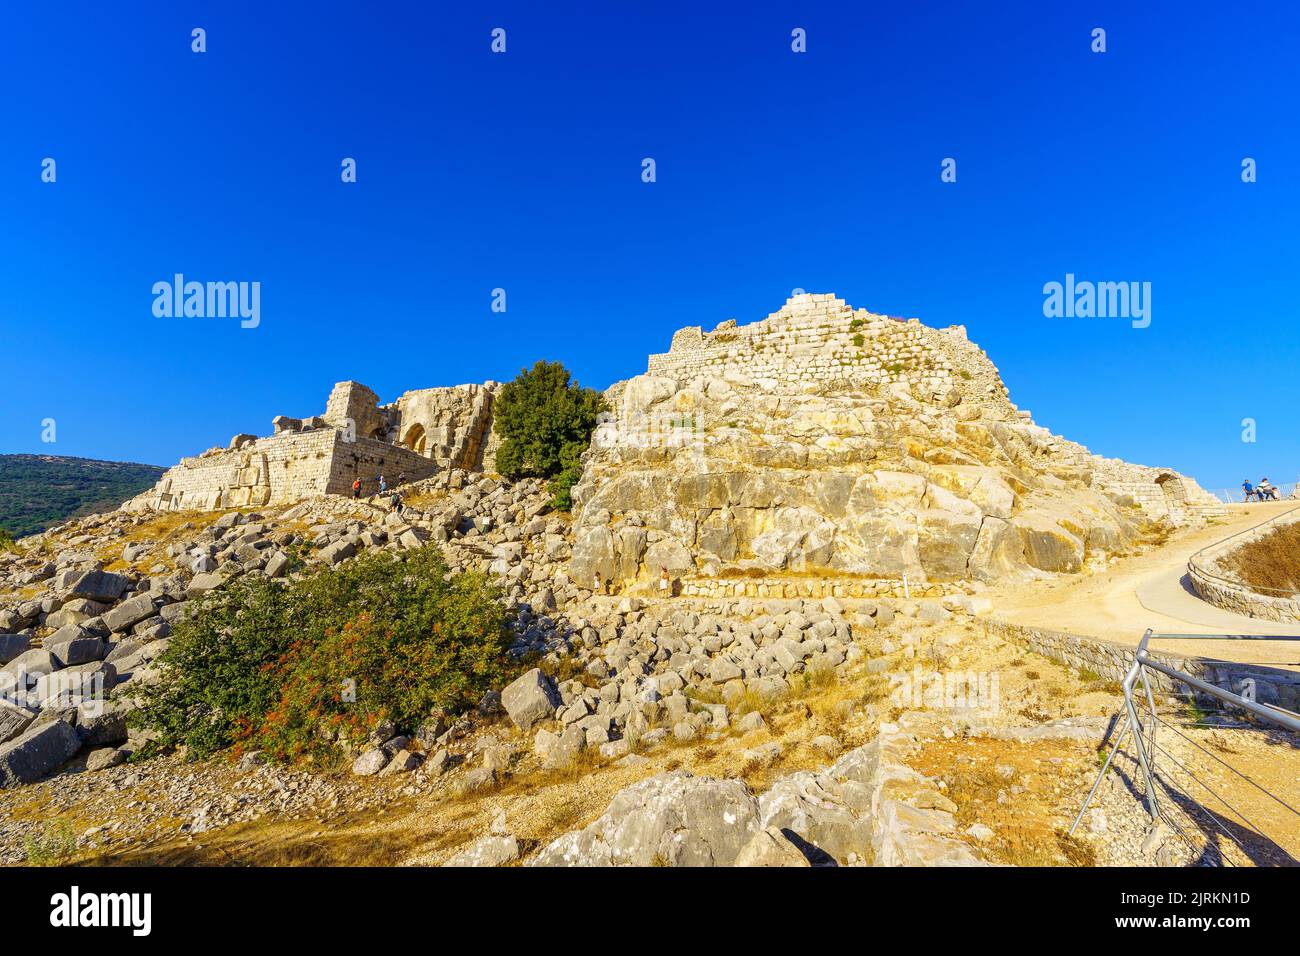 Nimrod, Israel - August 16, 2022: View from the west of the medieval Nimrod fortress, with visitors, in the Golan Heights, Northern Israel Stock Photo